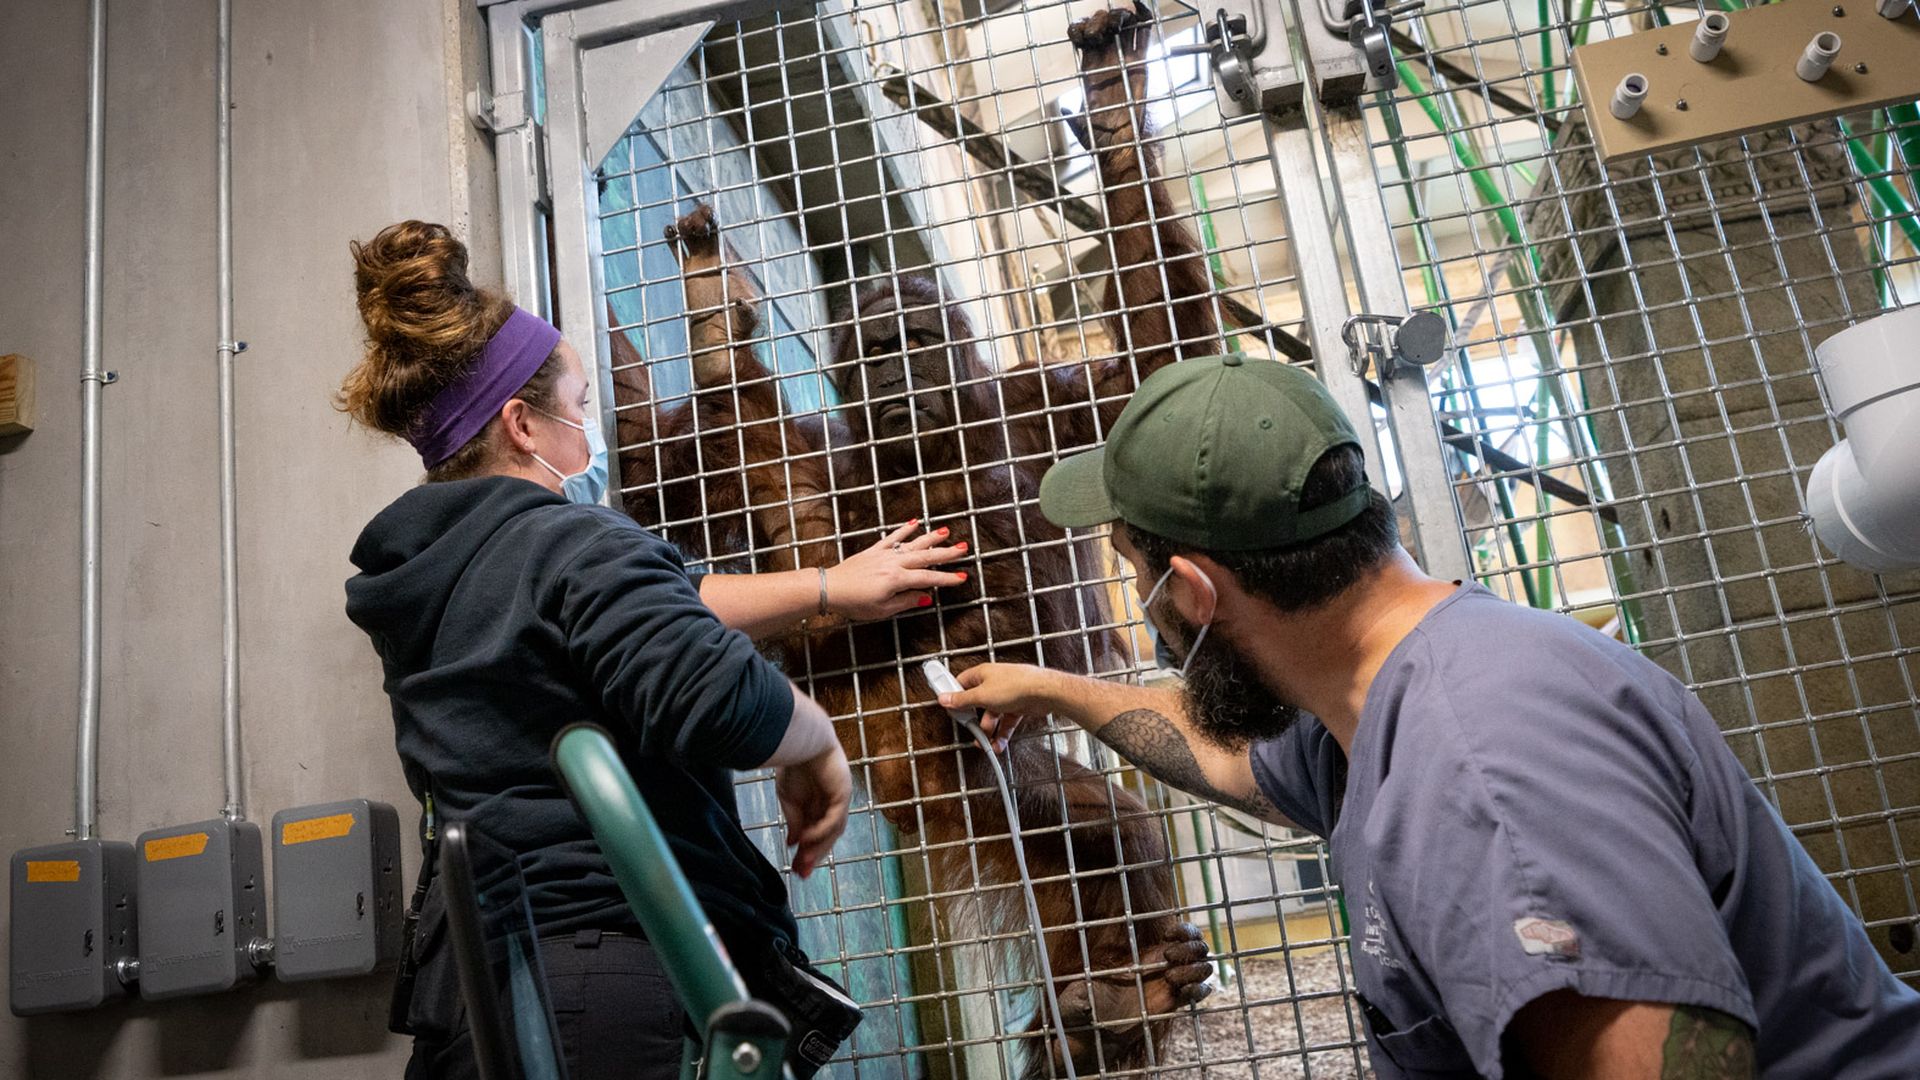 Khali the orangutan hangs from a metal wire door while a doctor performs an ultrasound of her uterus